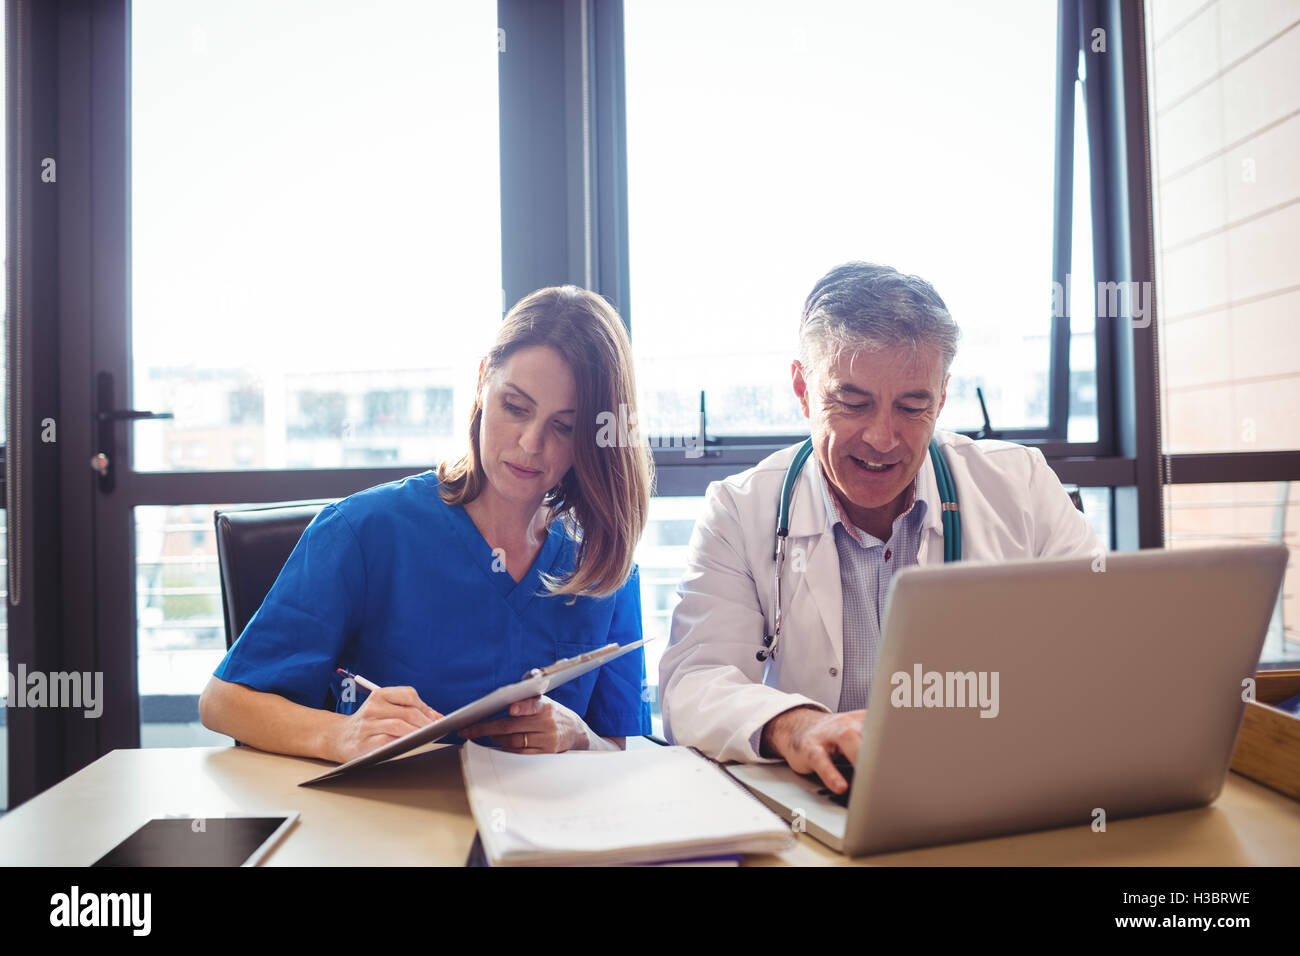 Doctor discussing with nurse over laptop Stock Photo